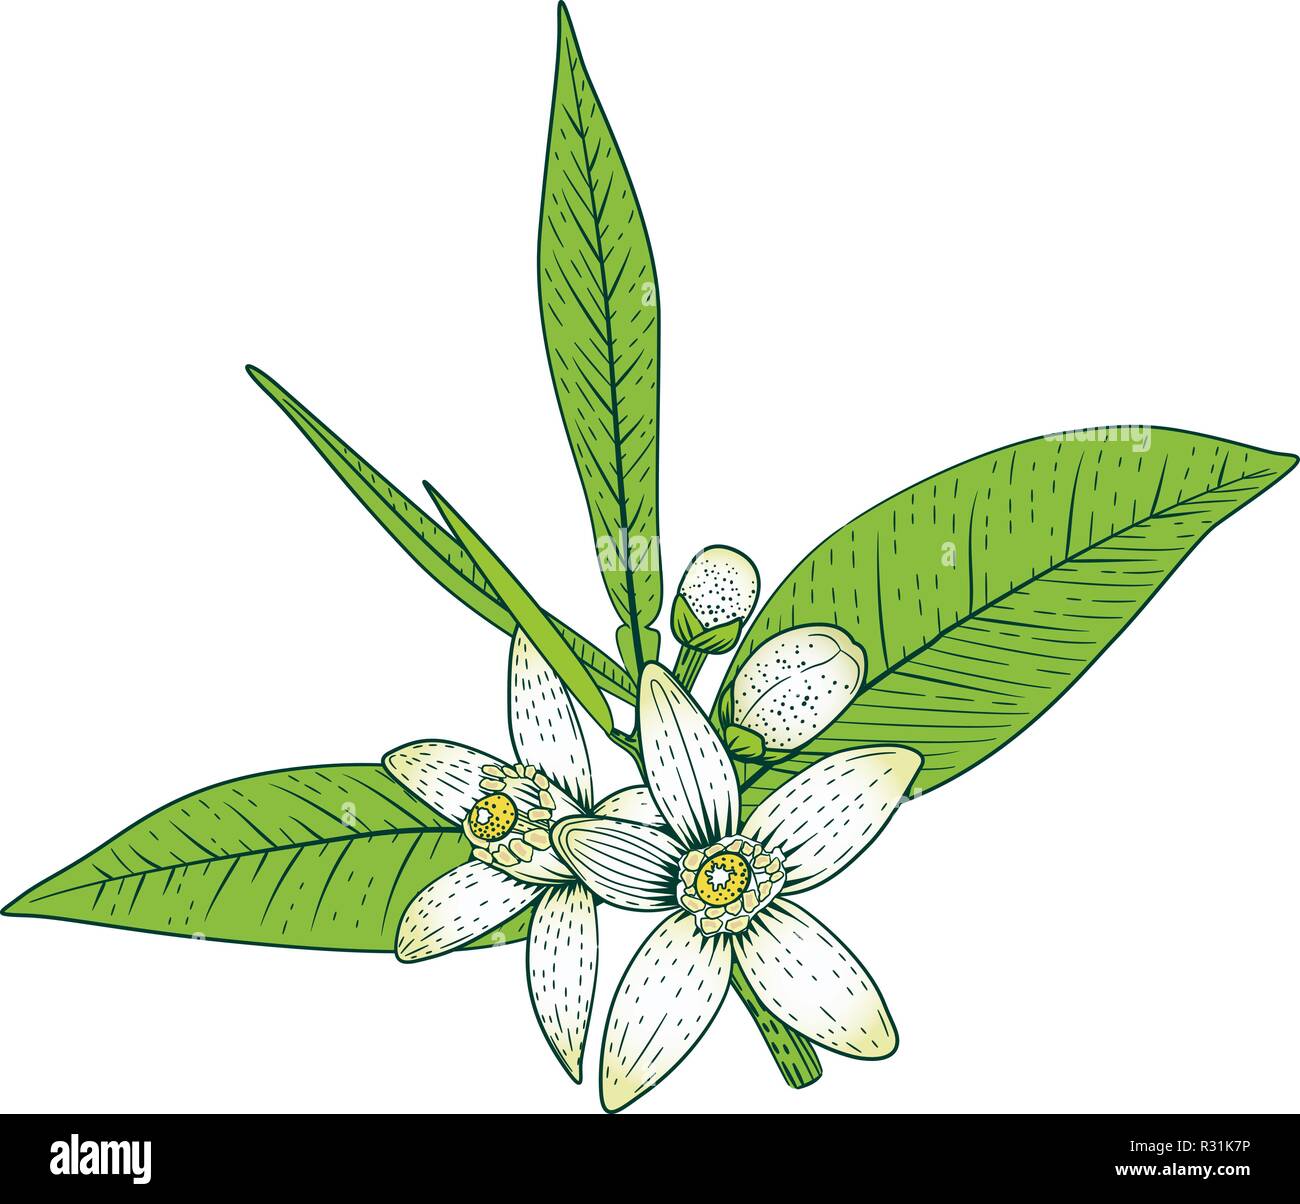 Branch of orange tree with white fragrant flowers, buds and leaves. Neroli blossom hand drawing vector illustration. Stock Vector